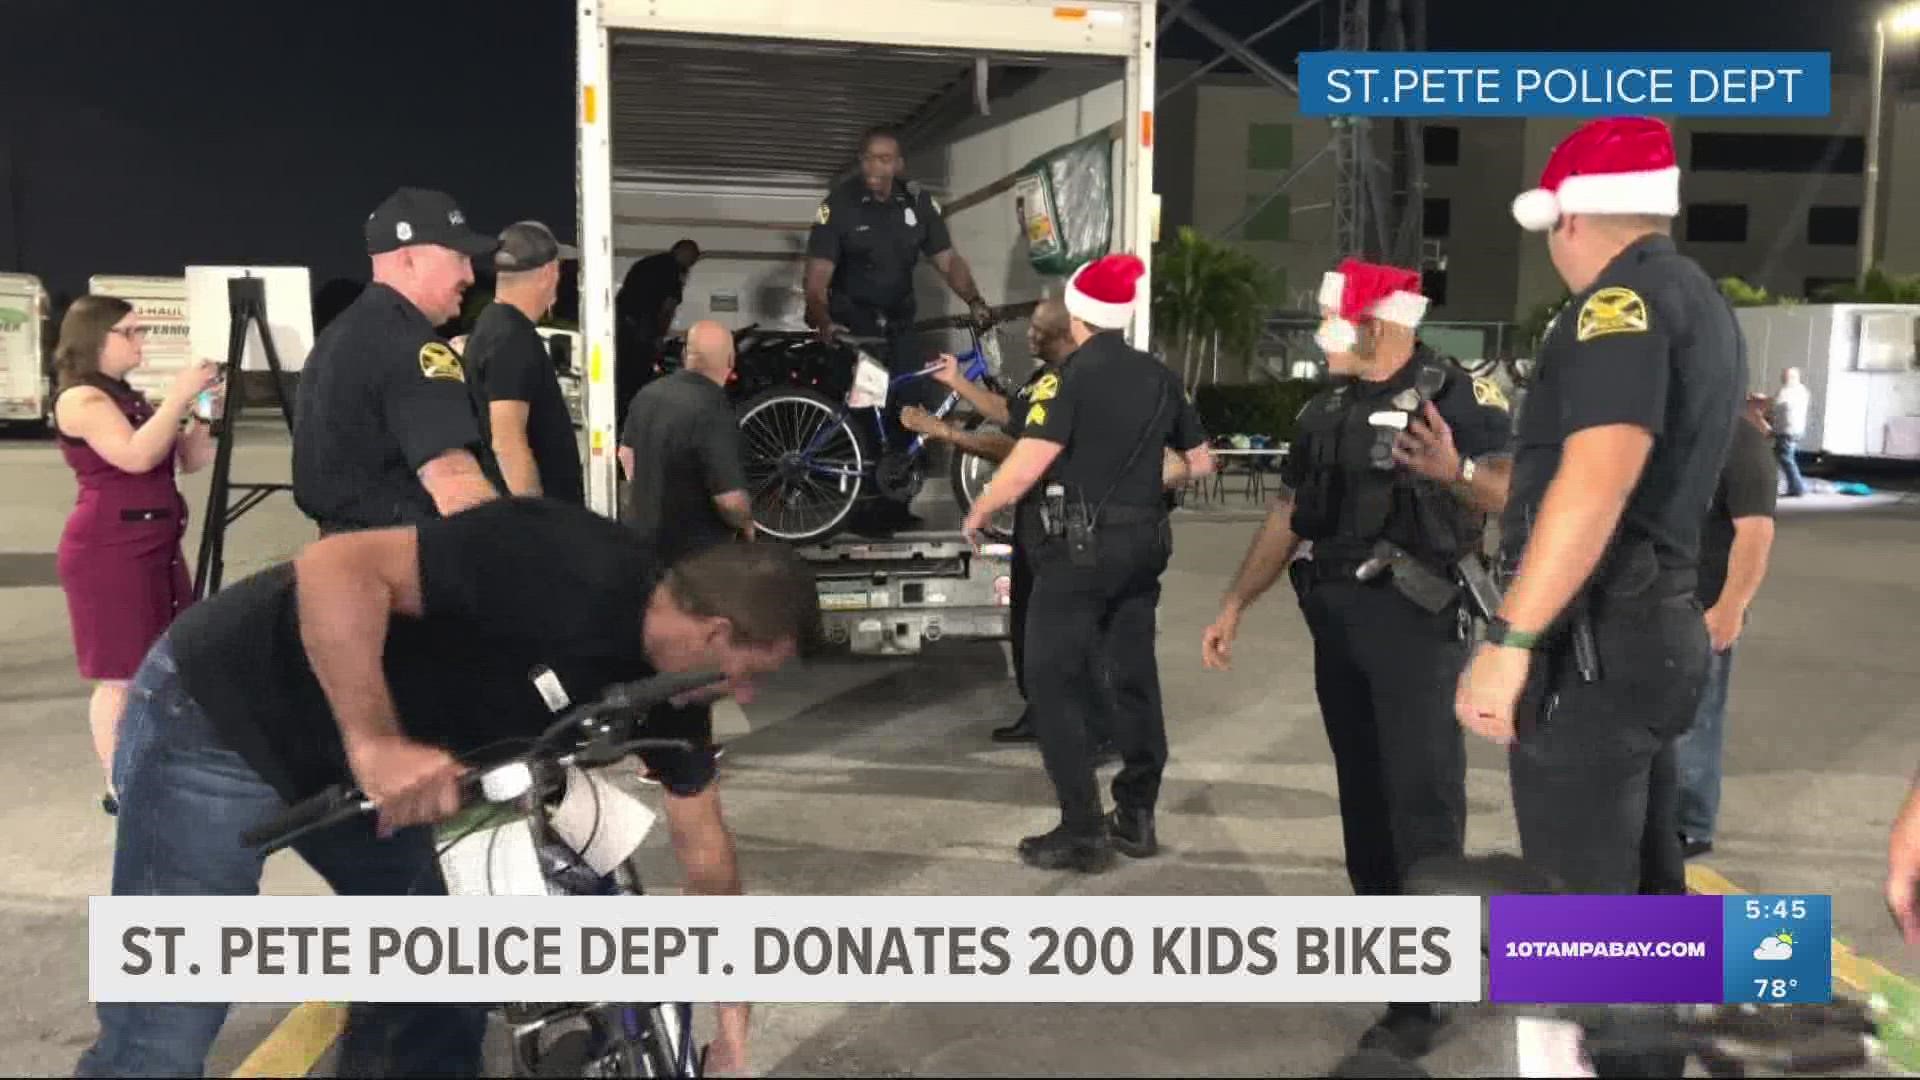 The tradition dates back to 2019 Alex DeJesus of St. Pete Fools Charities noticed an officer buying a bike for a teen at Walmart.